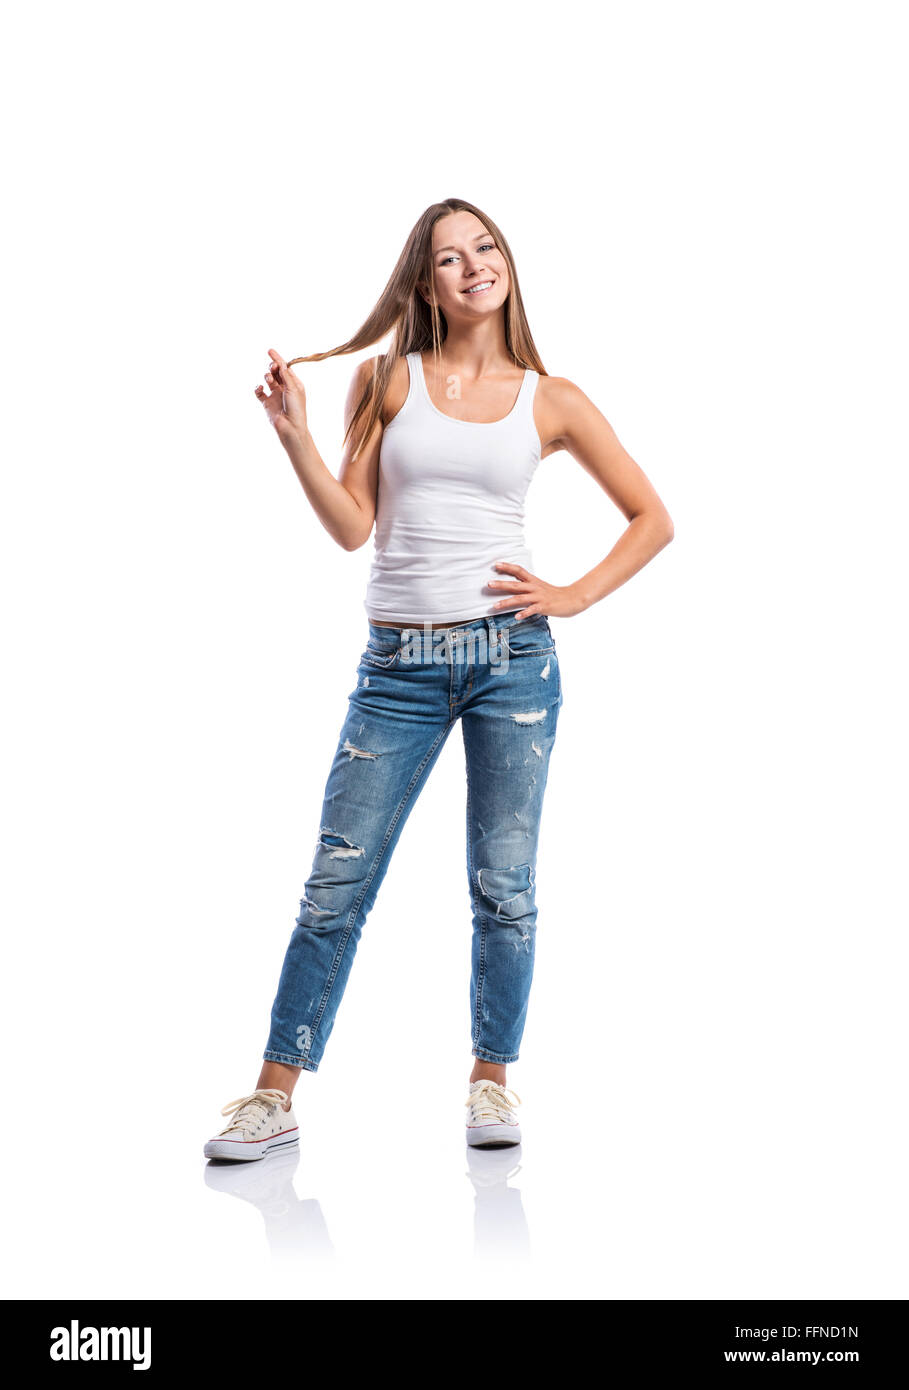 Woman in jeans and white singlet twirling hair,  isolated Stock Photo